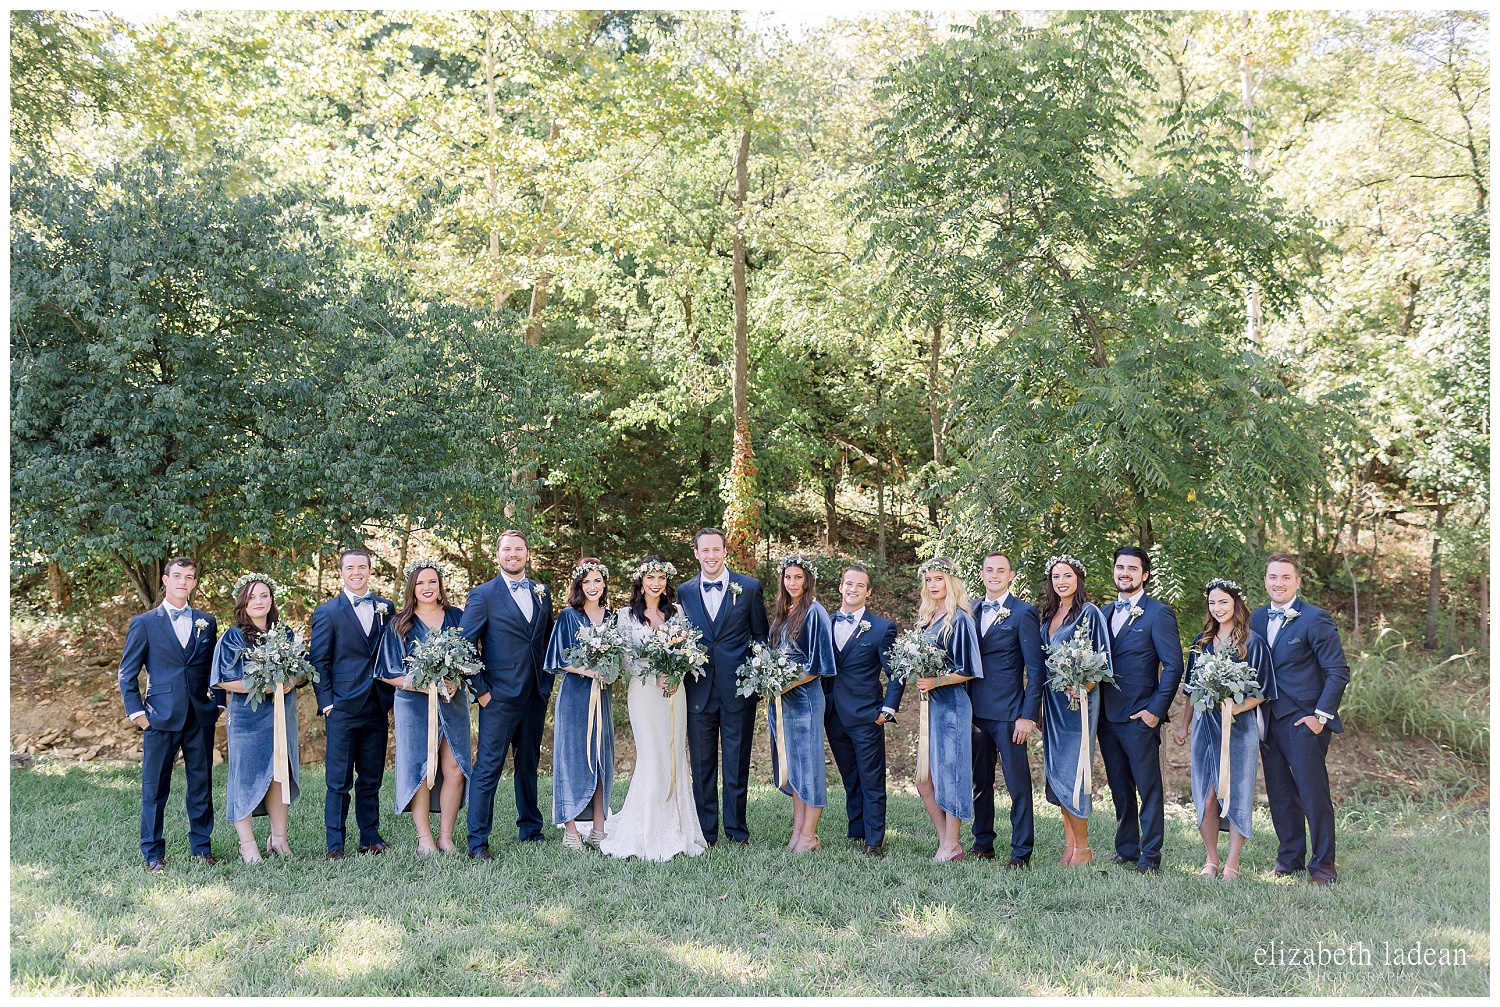 Willow-Creek-Blush-and-Blues-Outdoor-Wedding-Photography-S+Z2018-elizabeth-ladean-photography-photo_0558.jpg